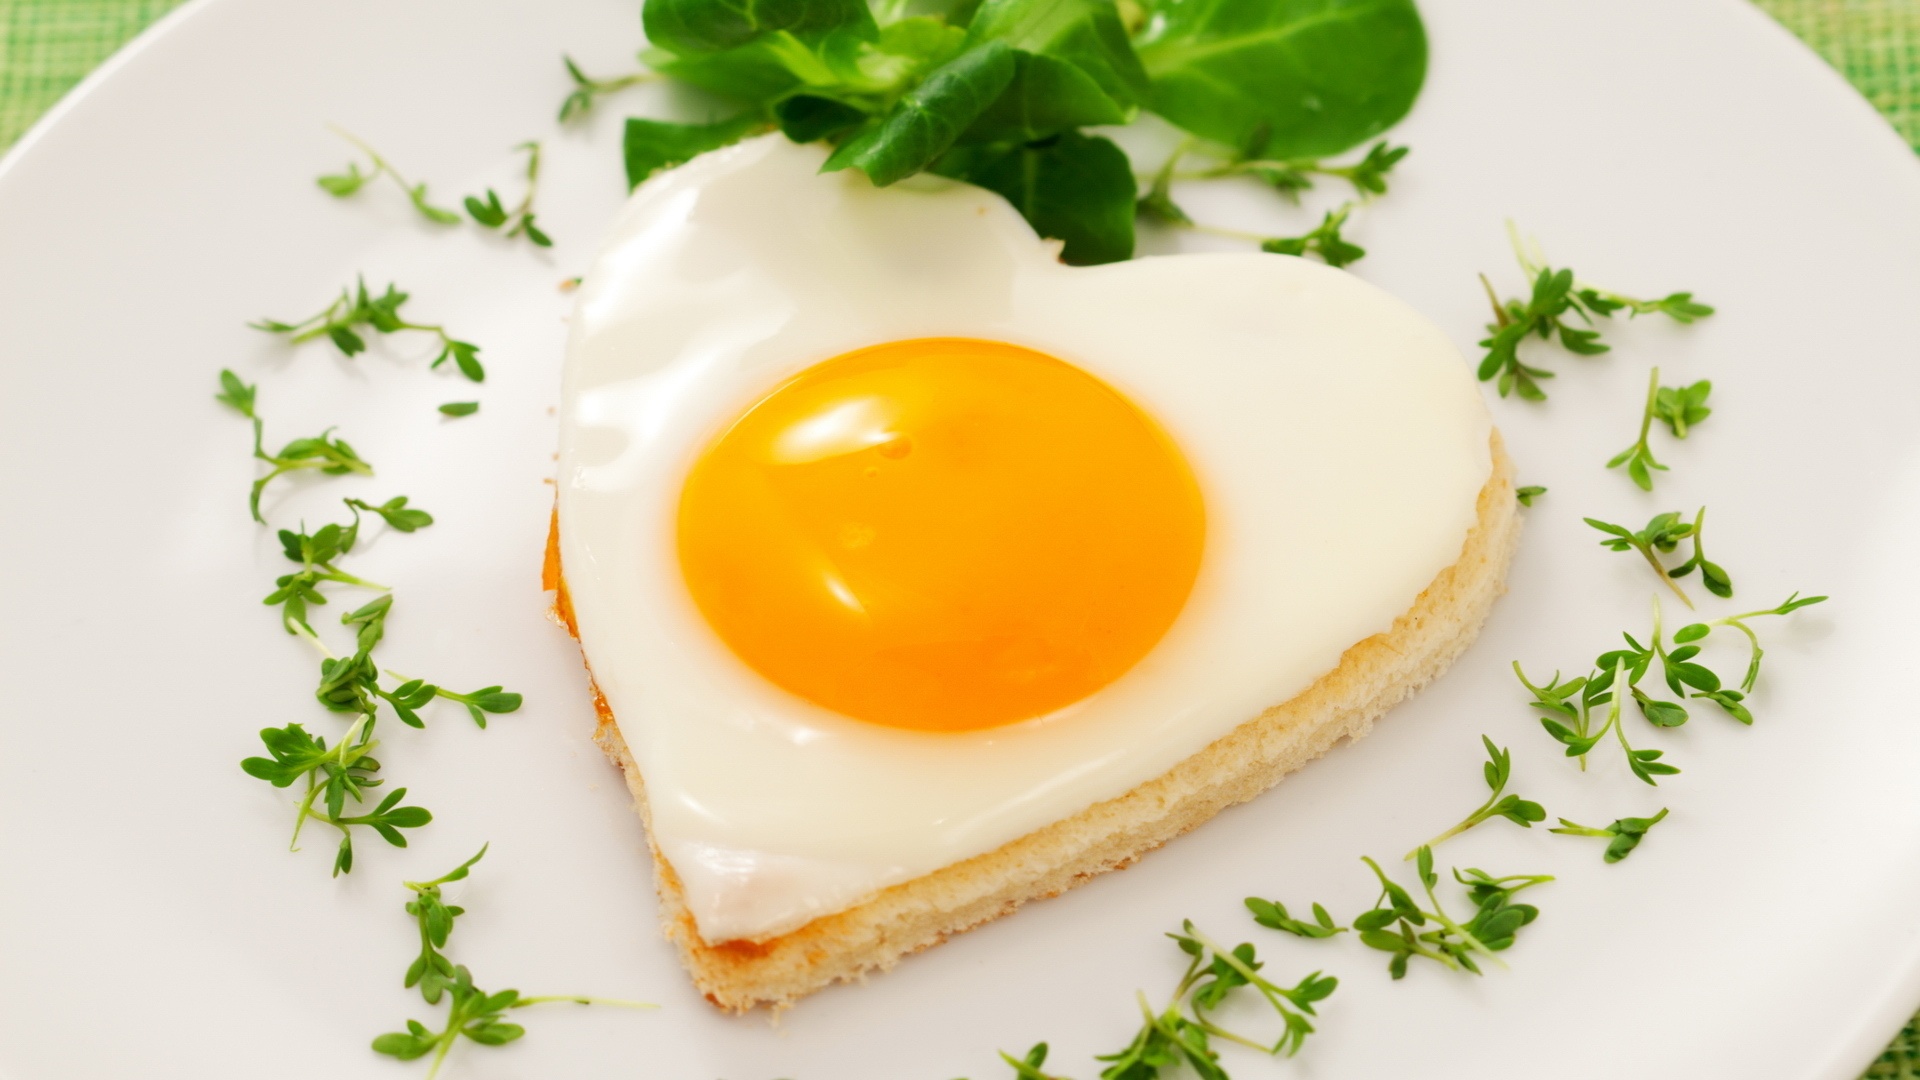 Heart Shaped Egg, A healthy breakfast reduces heart attack risk